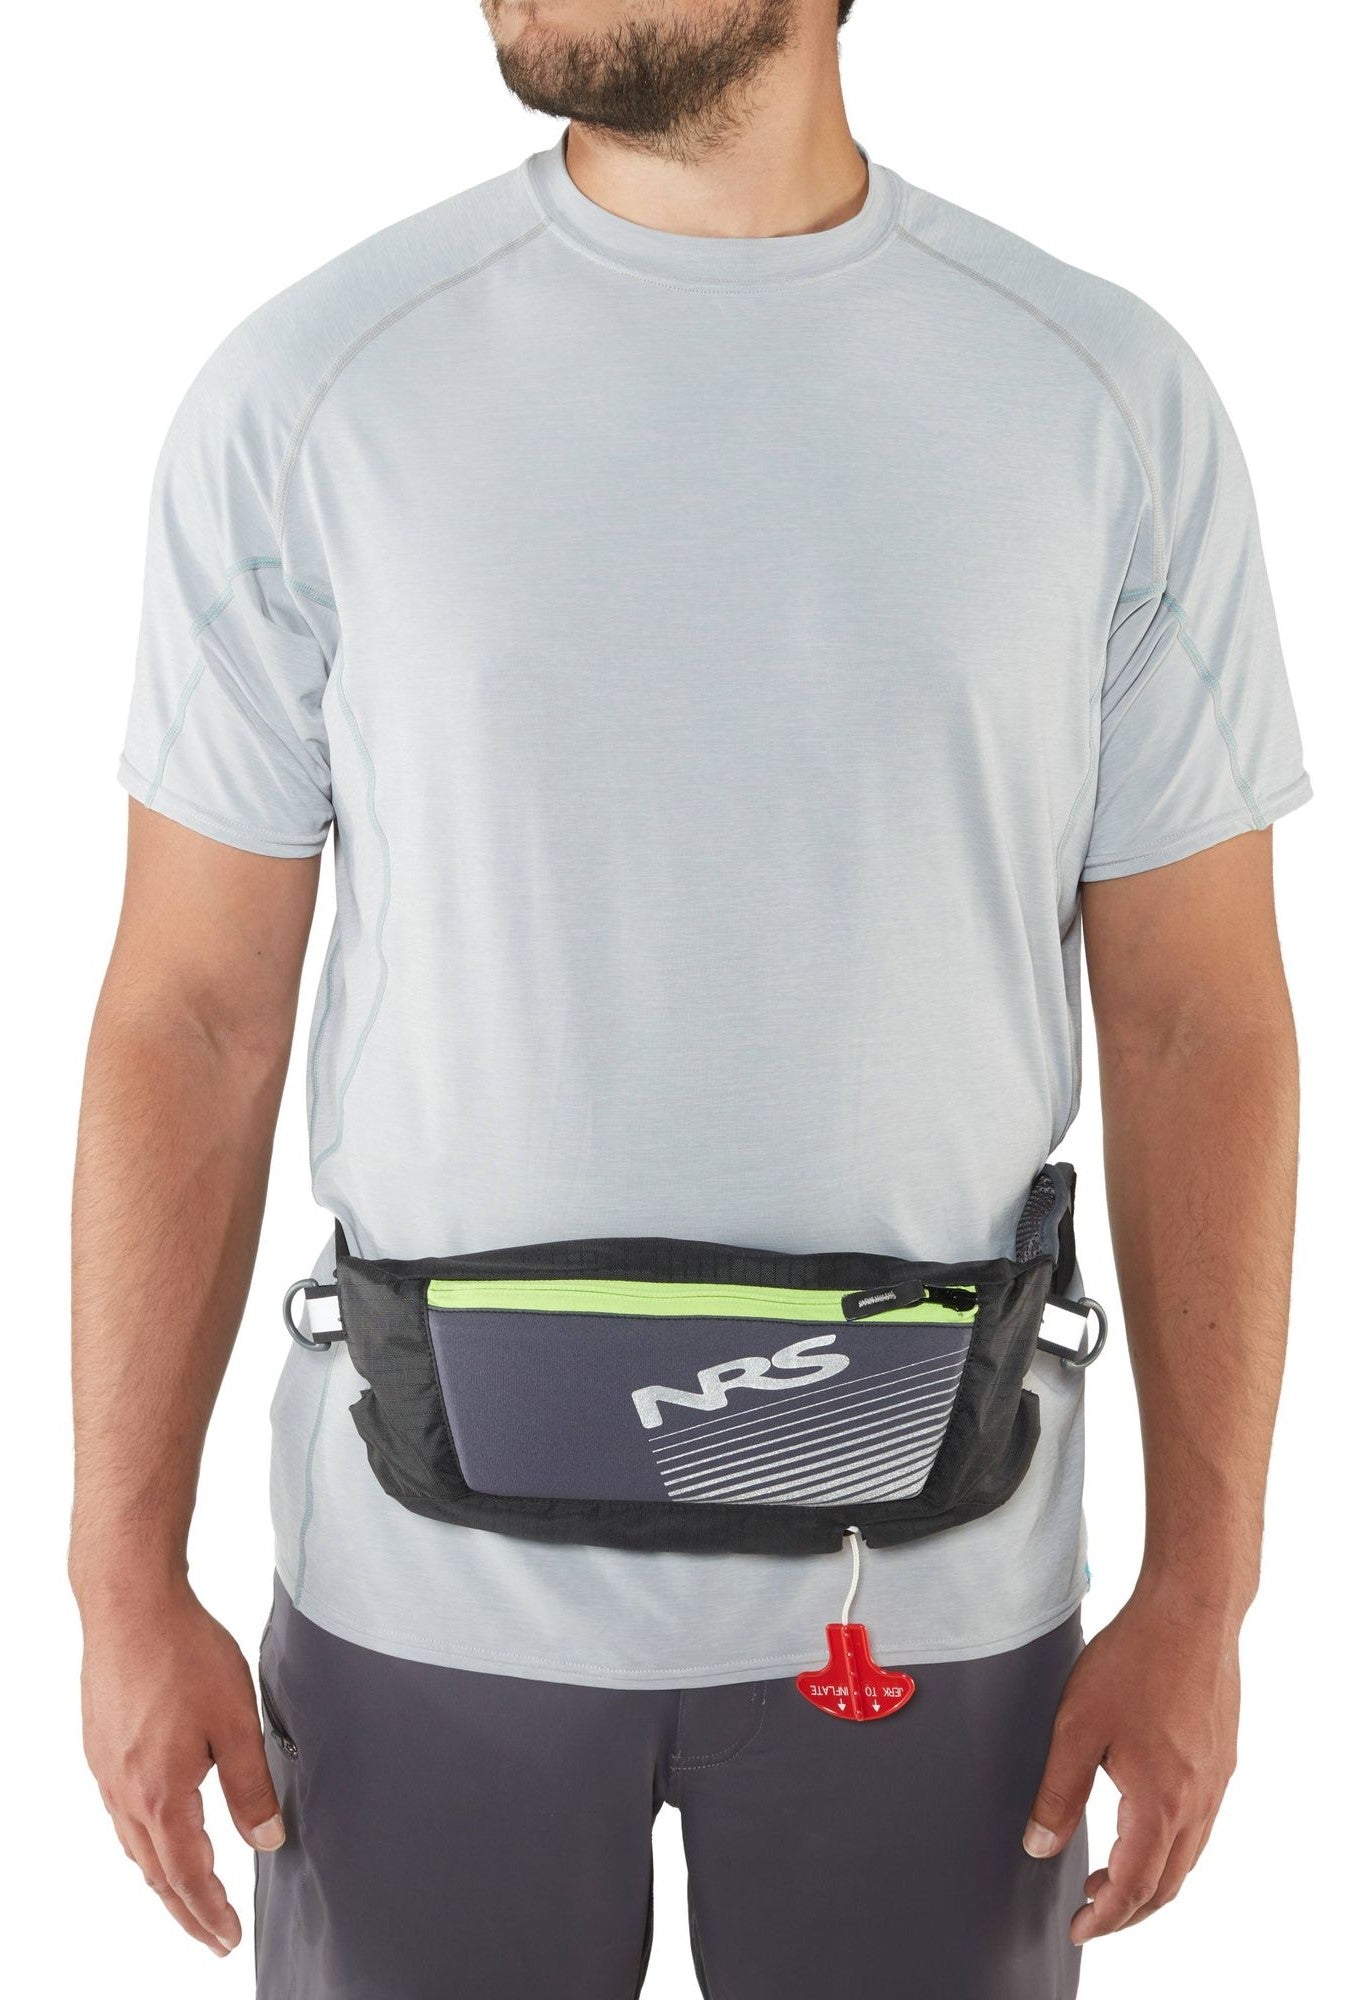 NRS Zephyr Inflatable PFD – Fishing Online